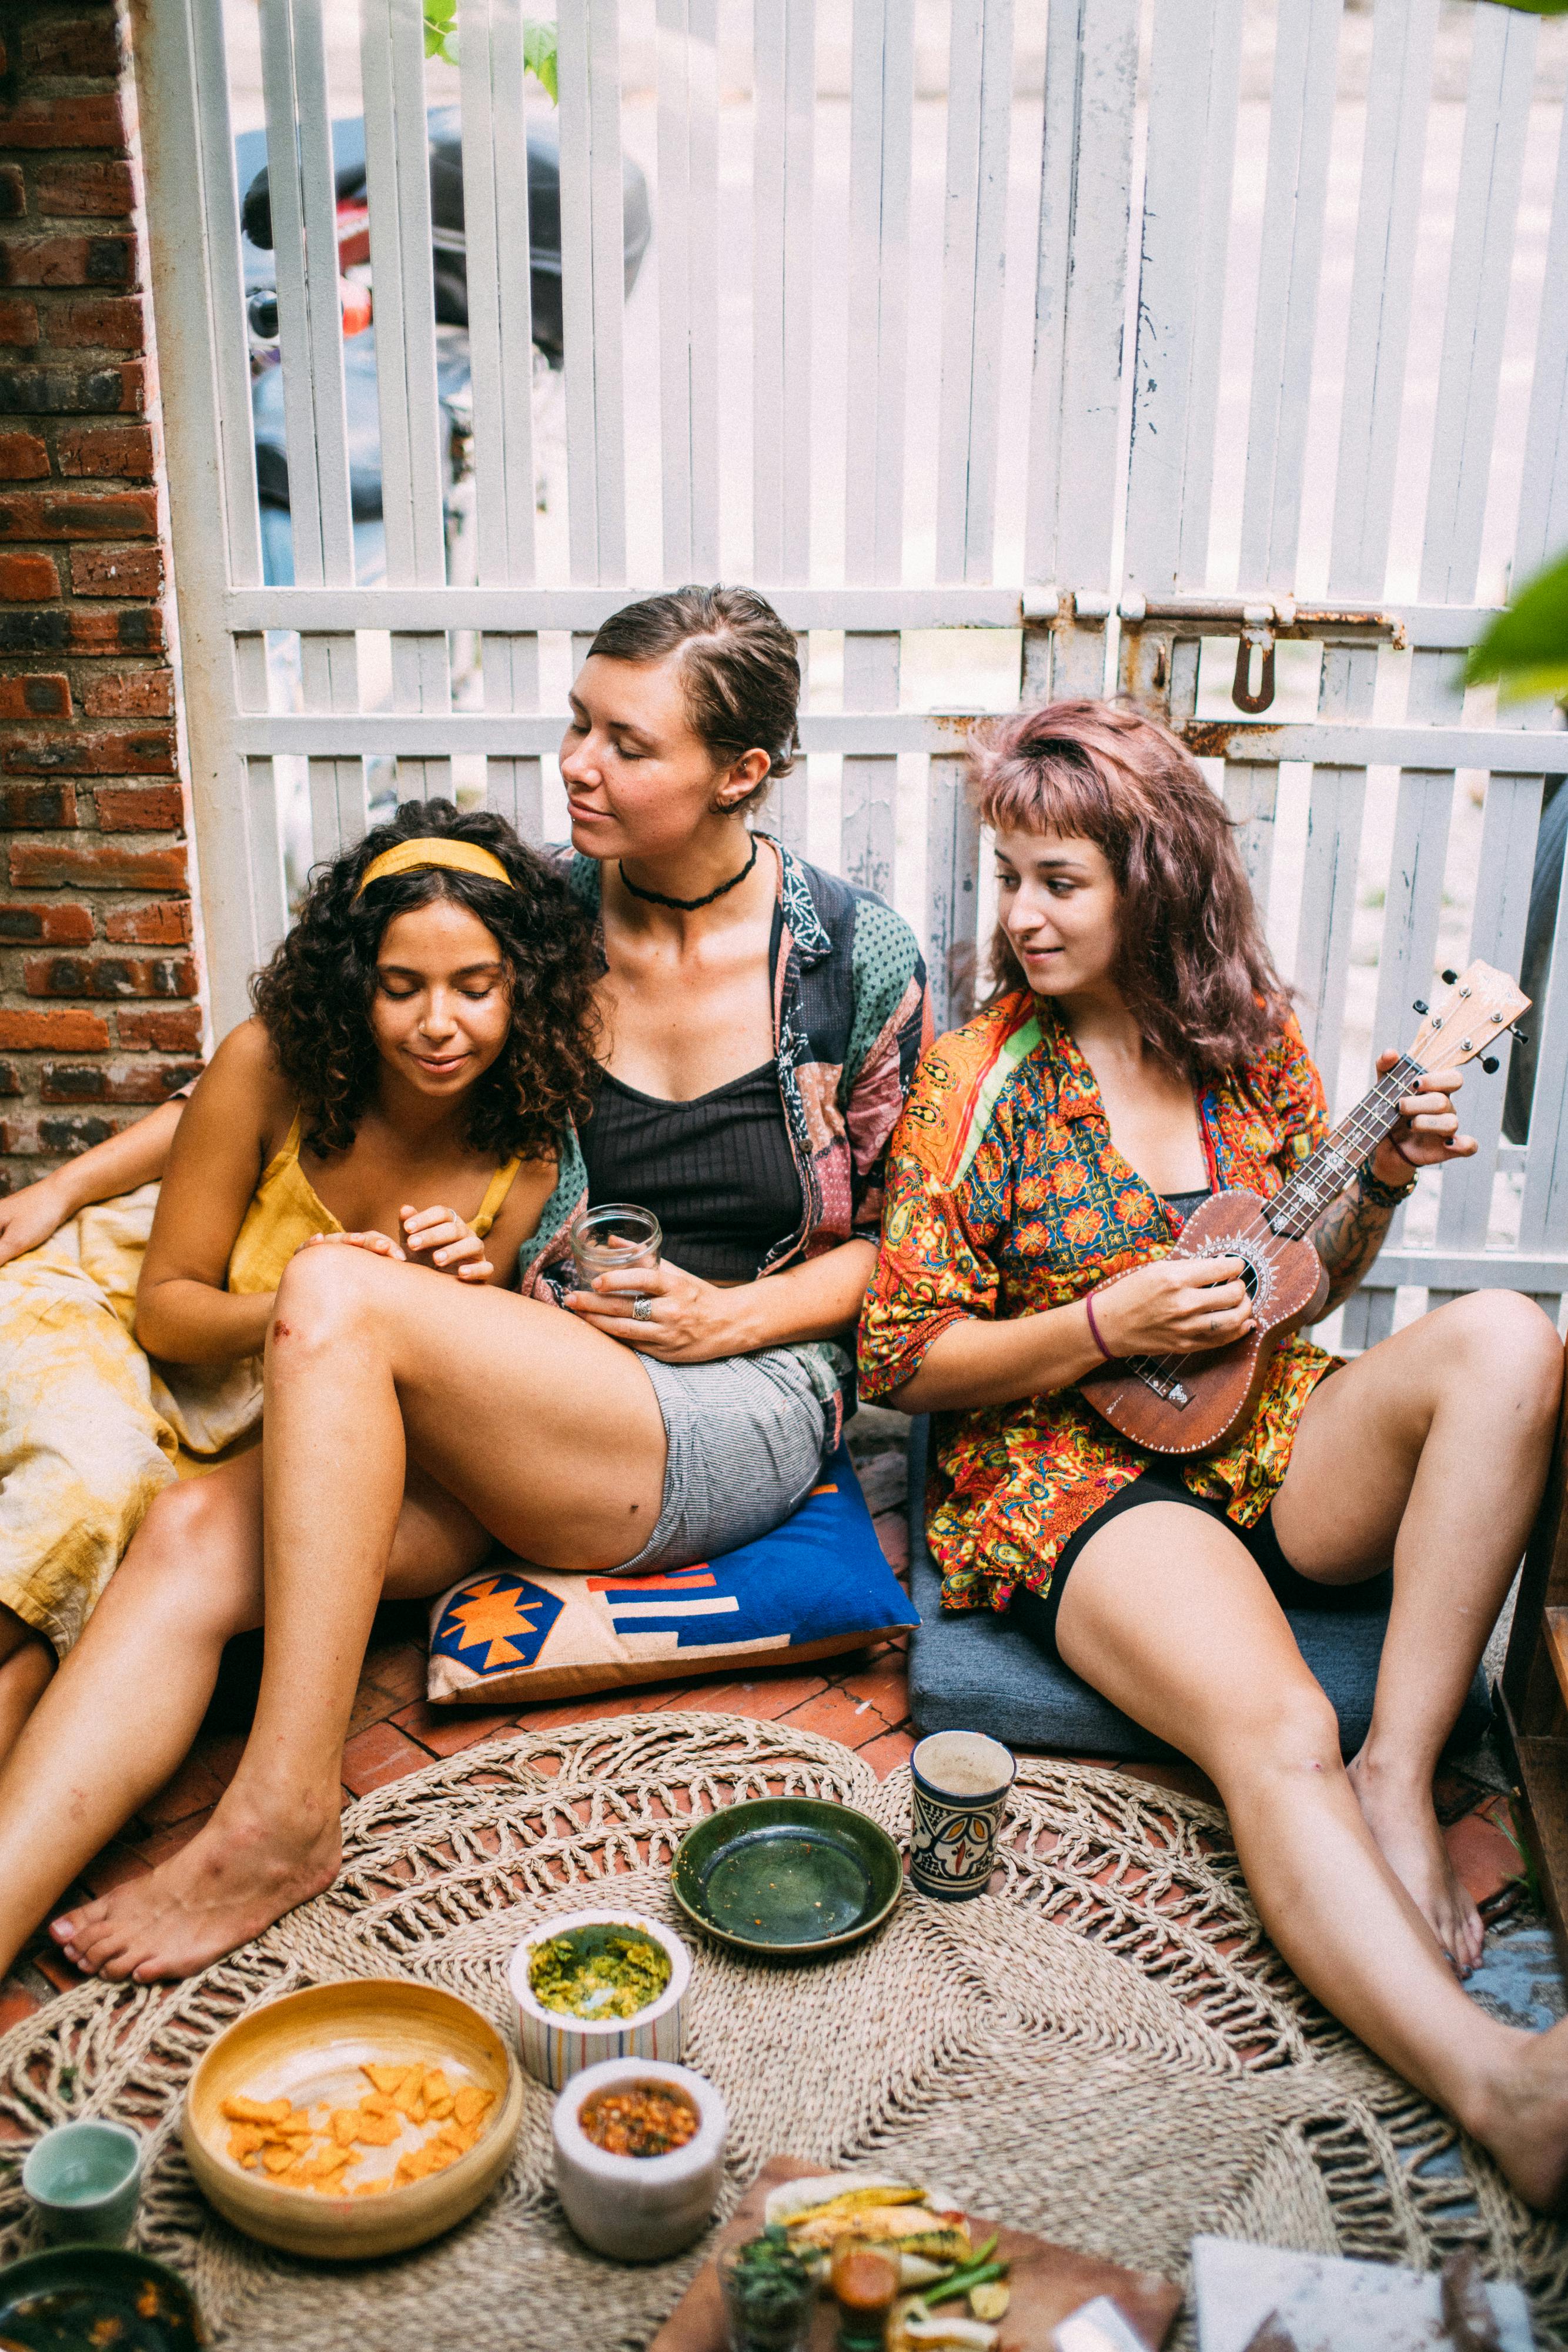 A woman hanging out with two teenage girls | Source: Pexels